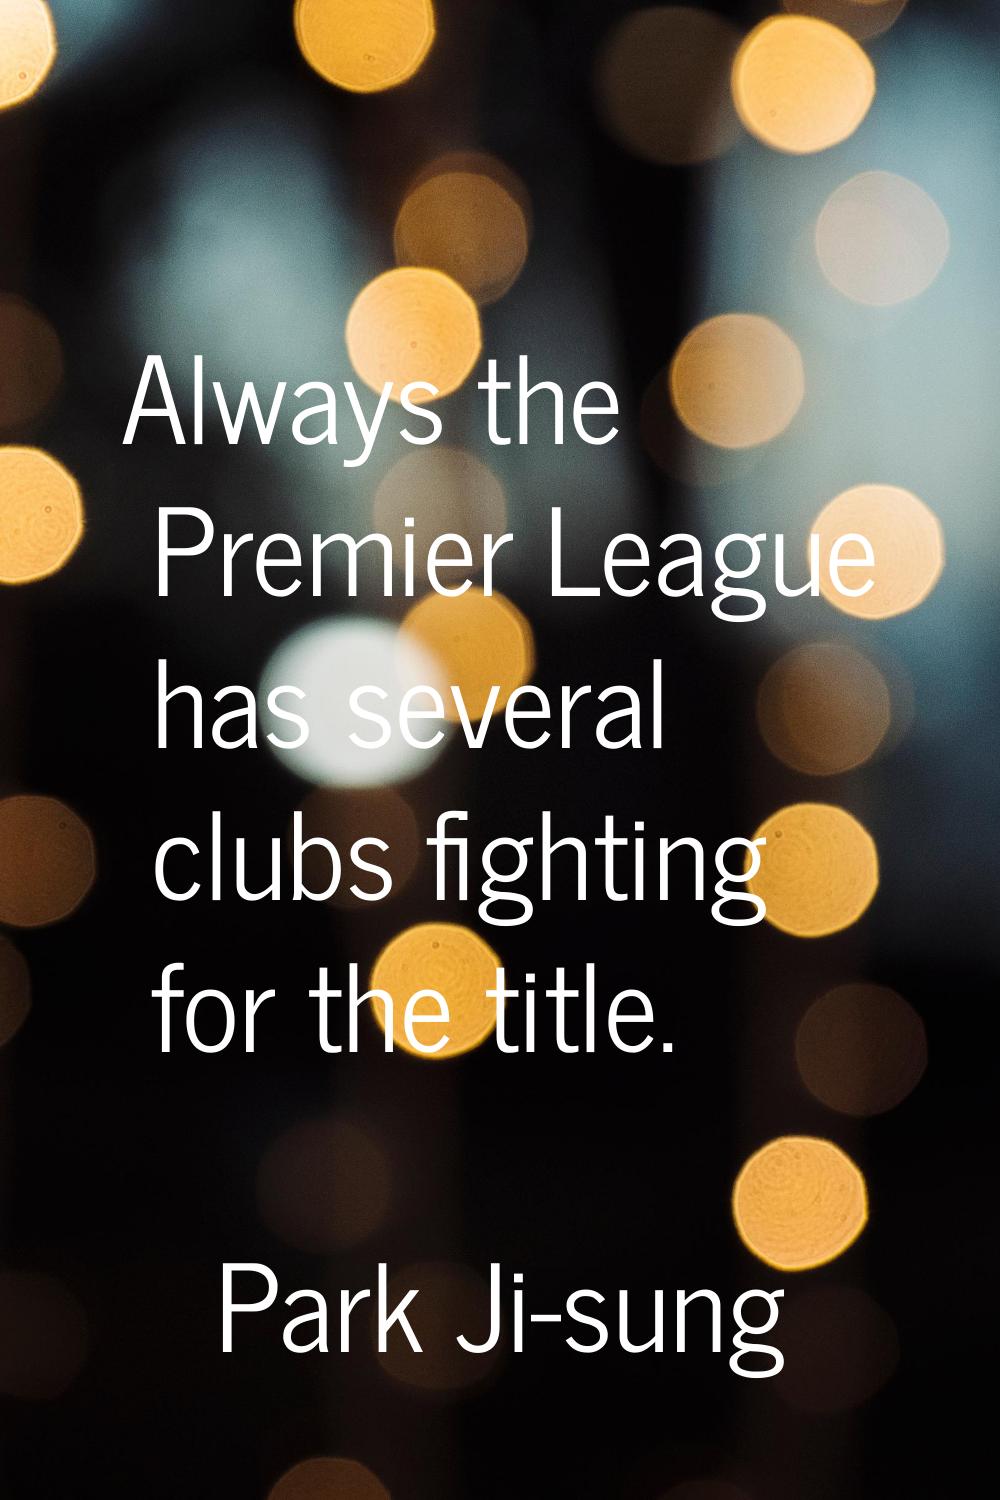 Always the Premier League has several clubs fighting for the title.